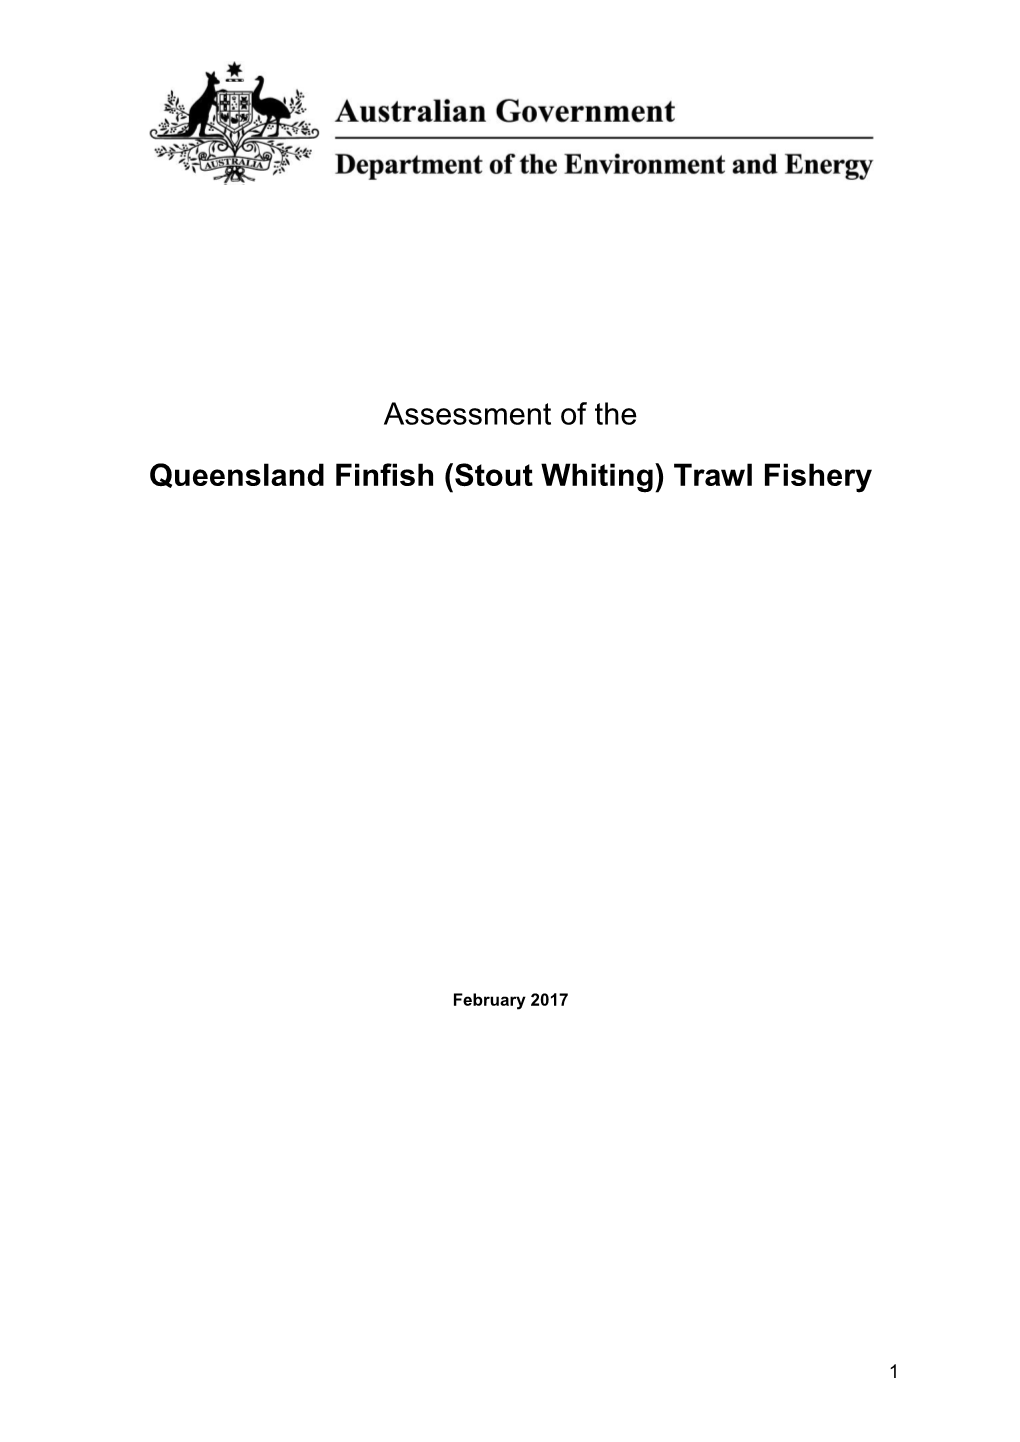 Assessment of the Queensland Finfish (Stout Whiting) Trawl Fishery